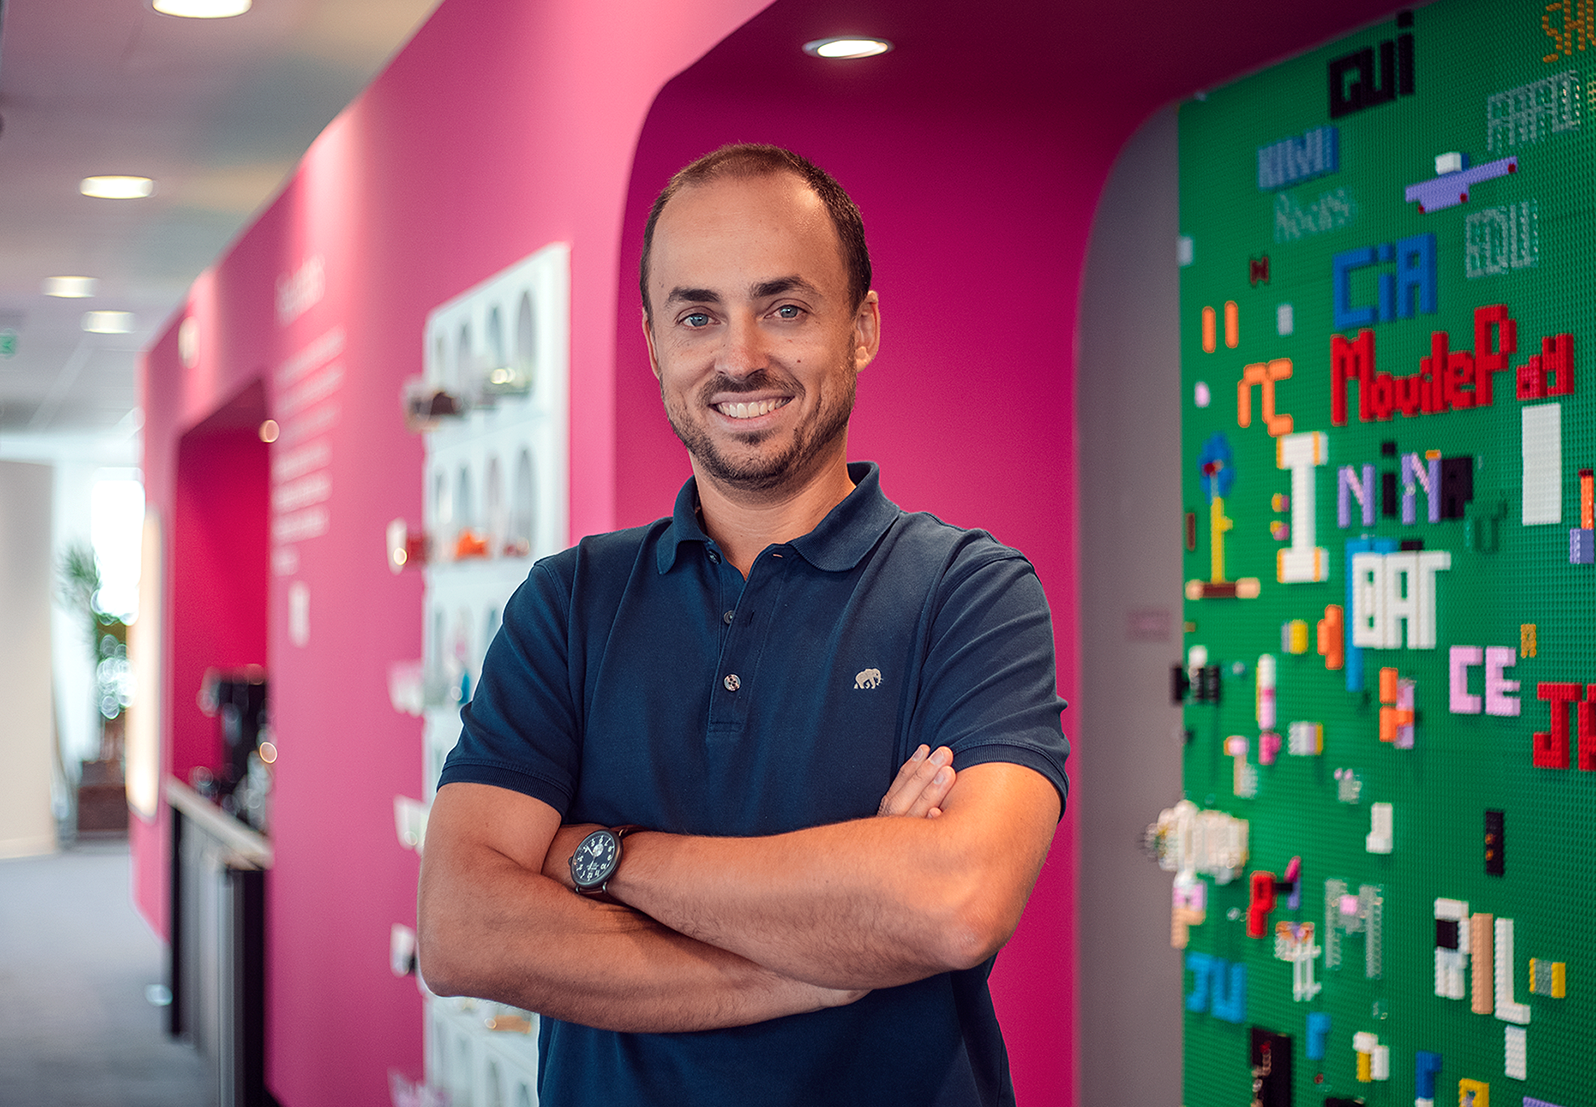 New CEO Patrick Hruby takes the helm of Movile Group, one of Brazil's 12 unicorns.